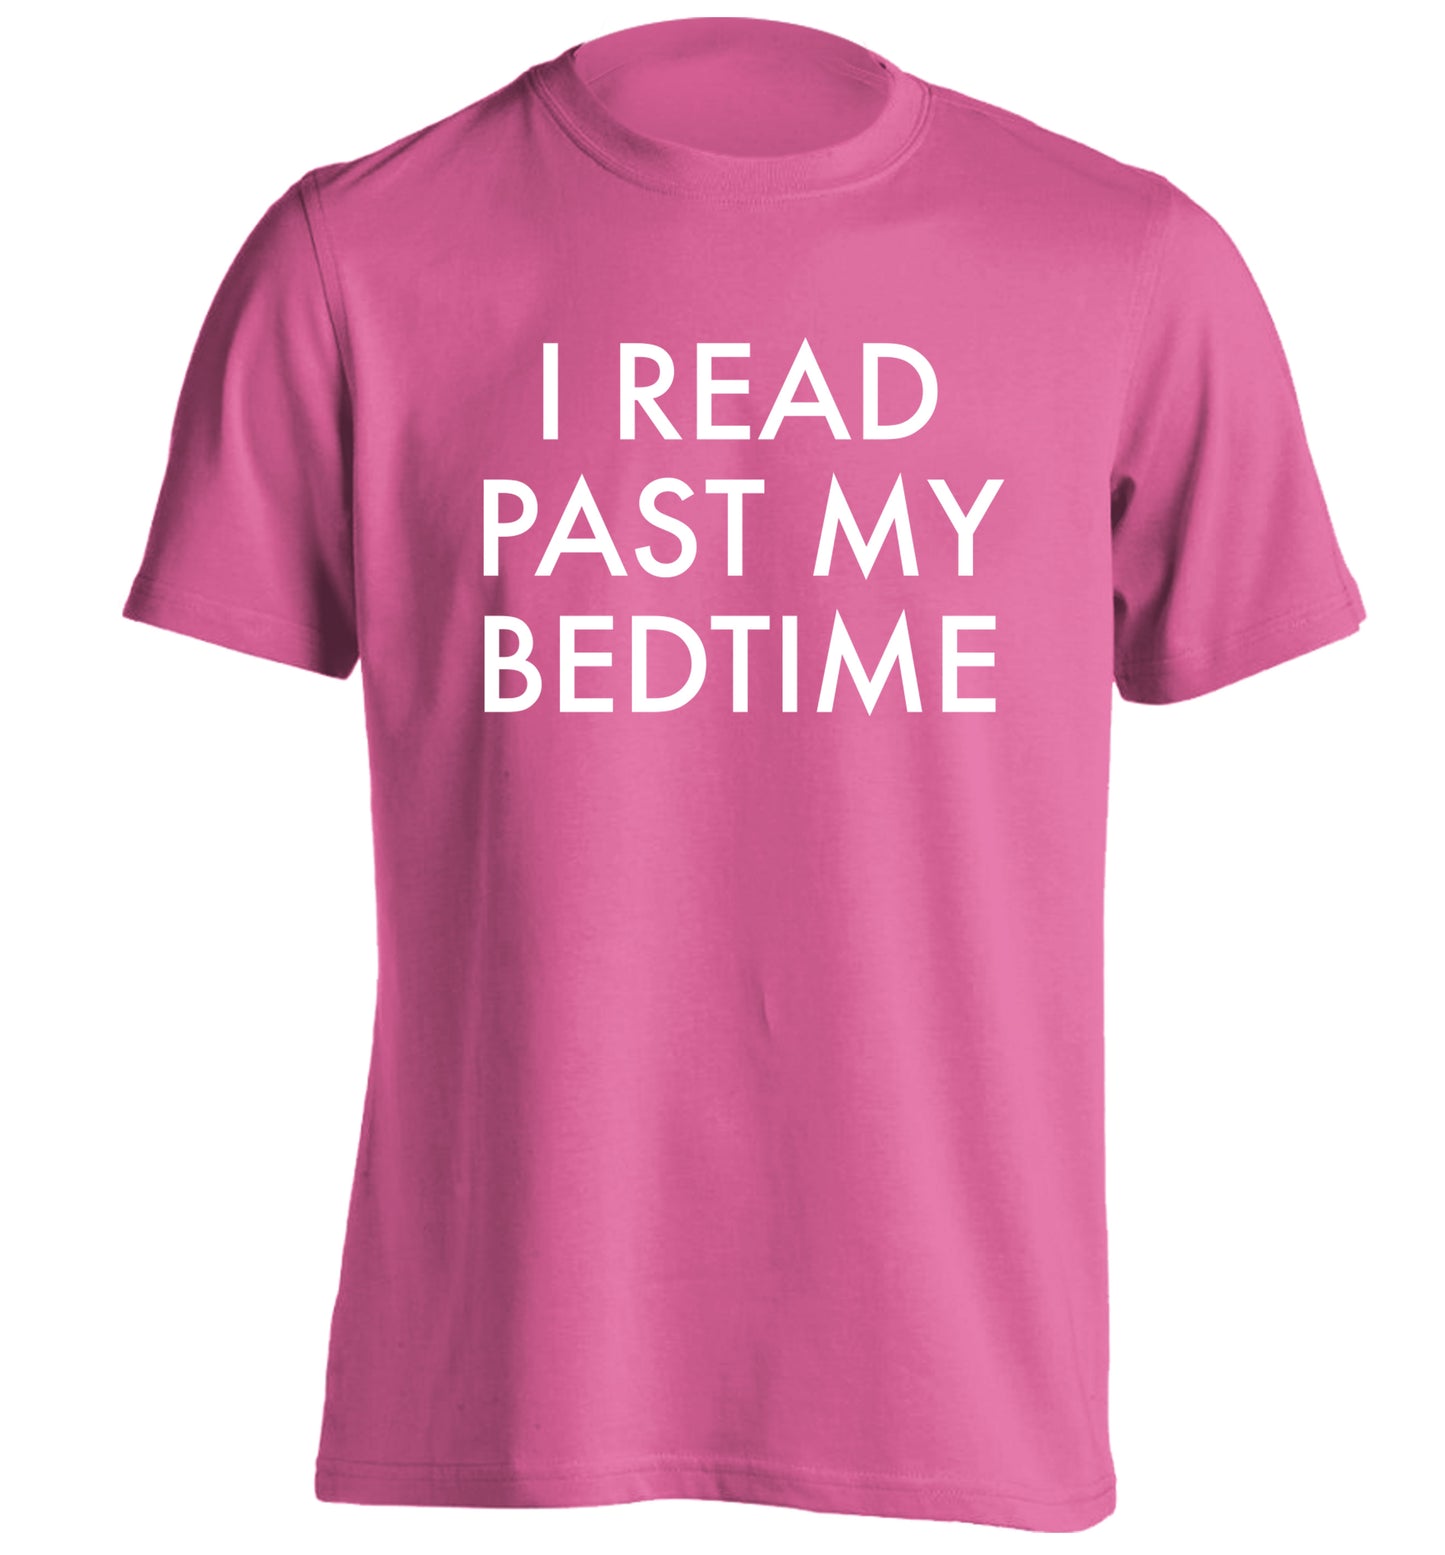 I read past my bedtime adults unisex pink Tshirt 2XL